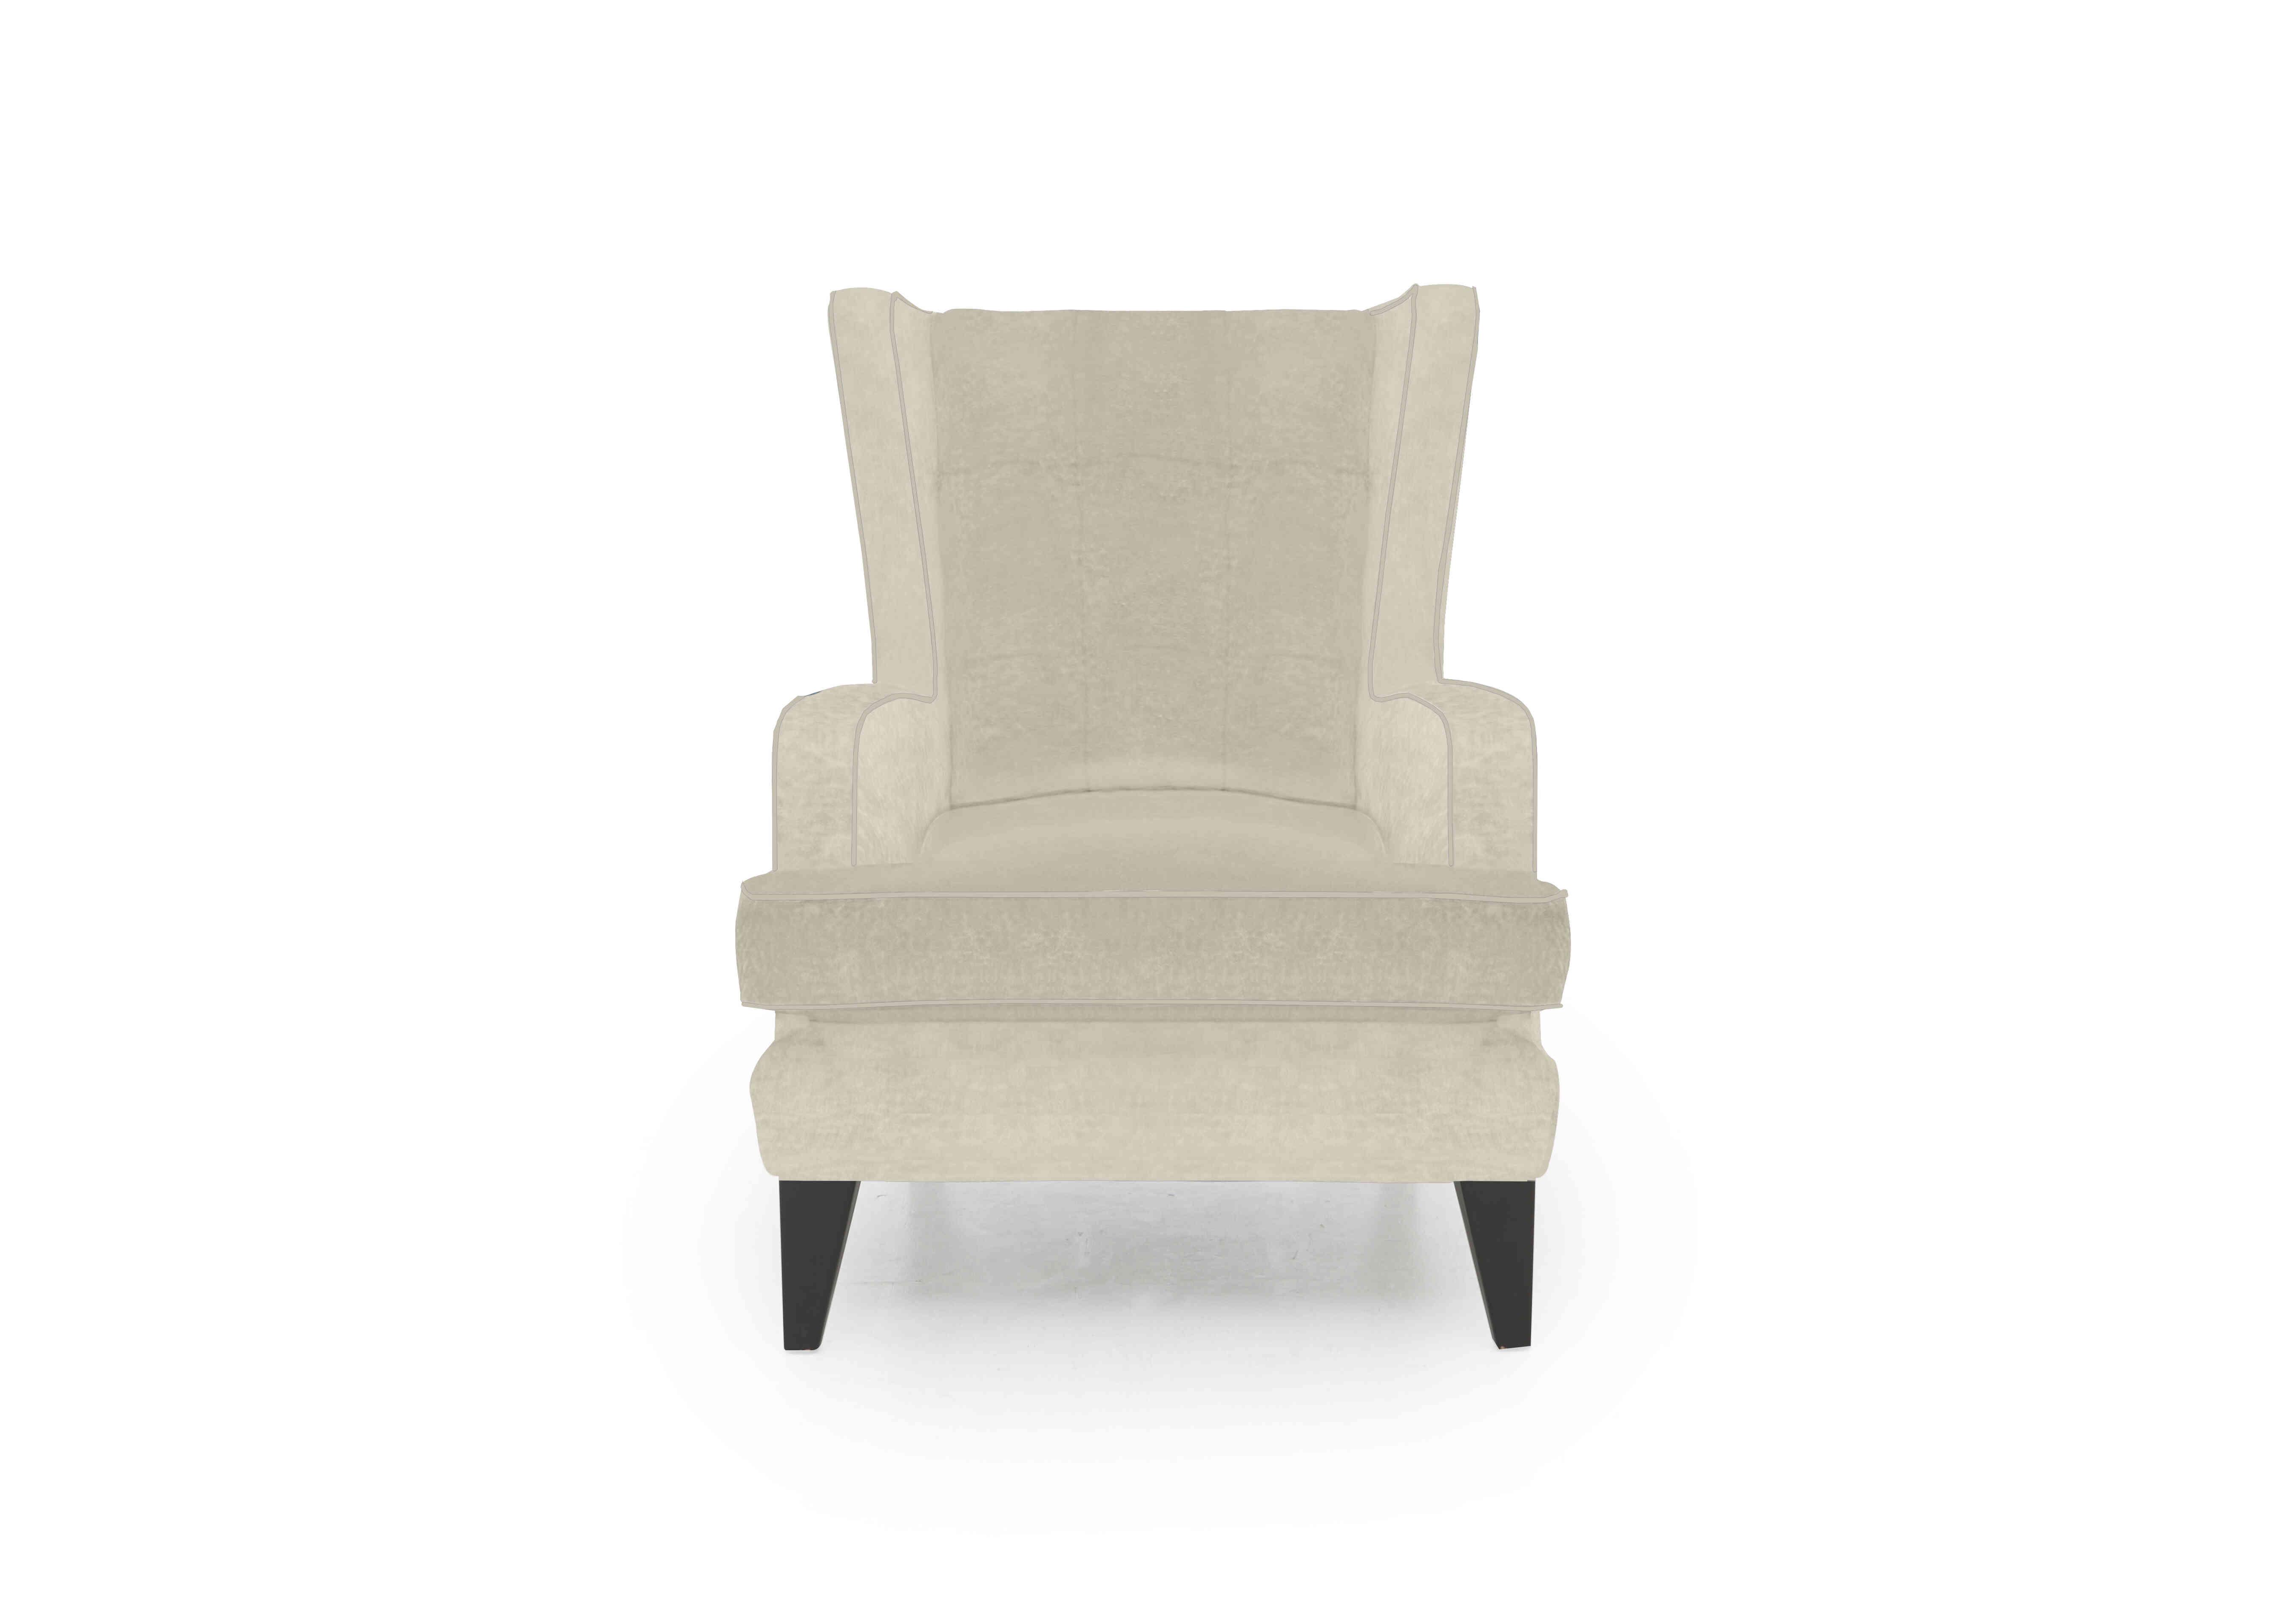 Modern Classics Wing Chair in Remini Pebble Sp Mf on Furniture Village